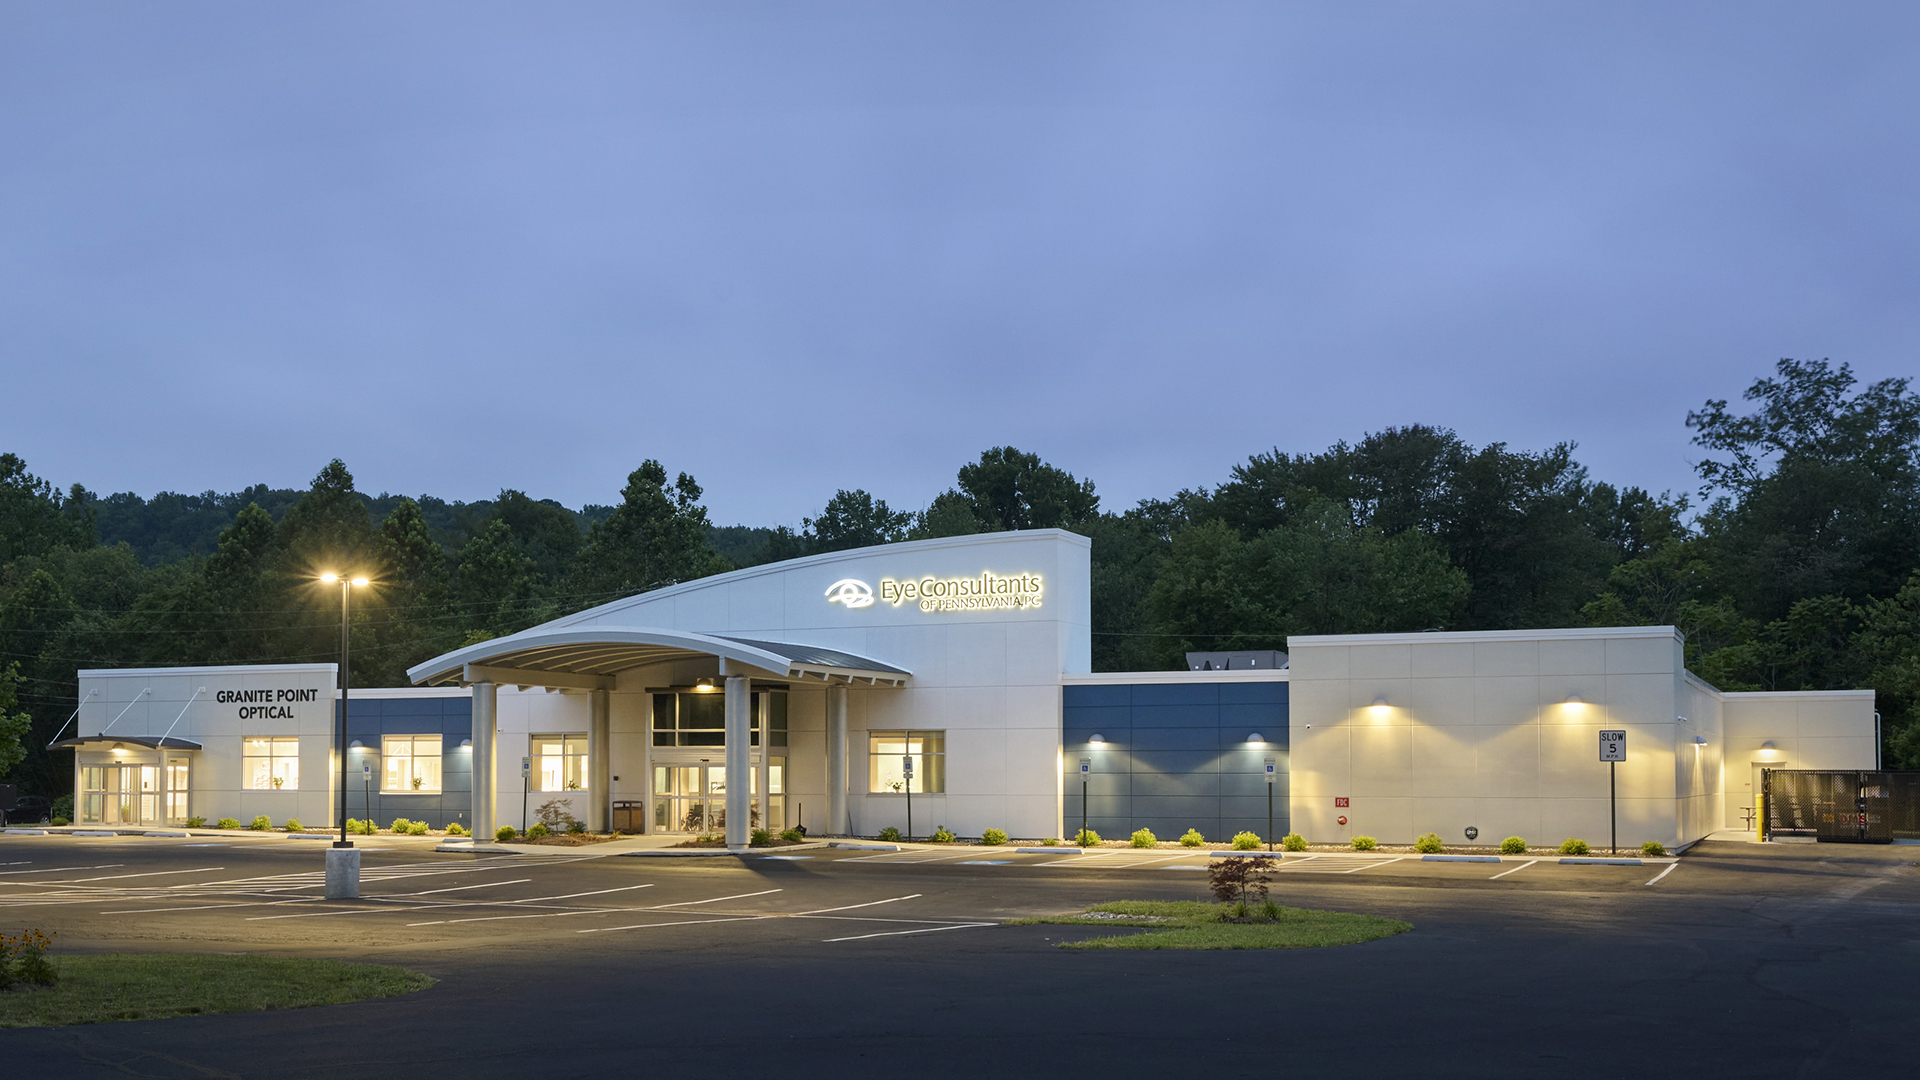 Medical Office Building for Eye Consultants of Pennsylvania